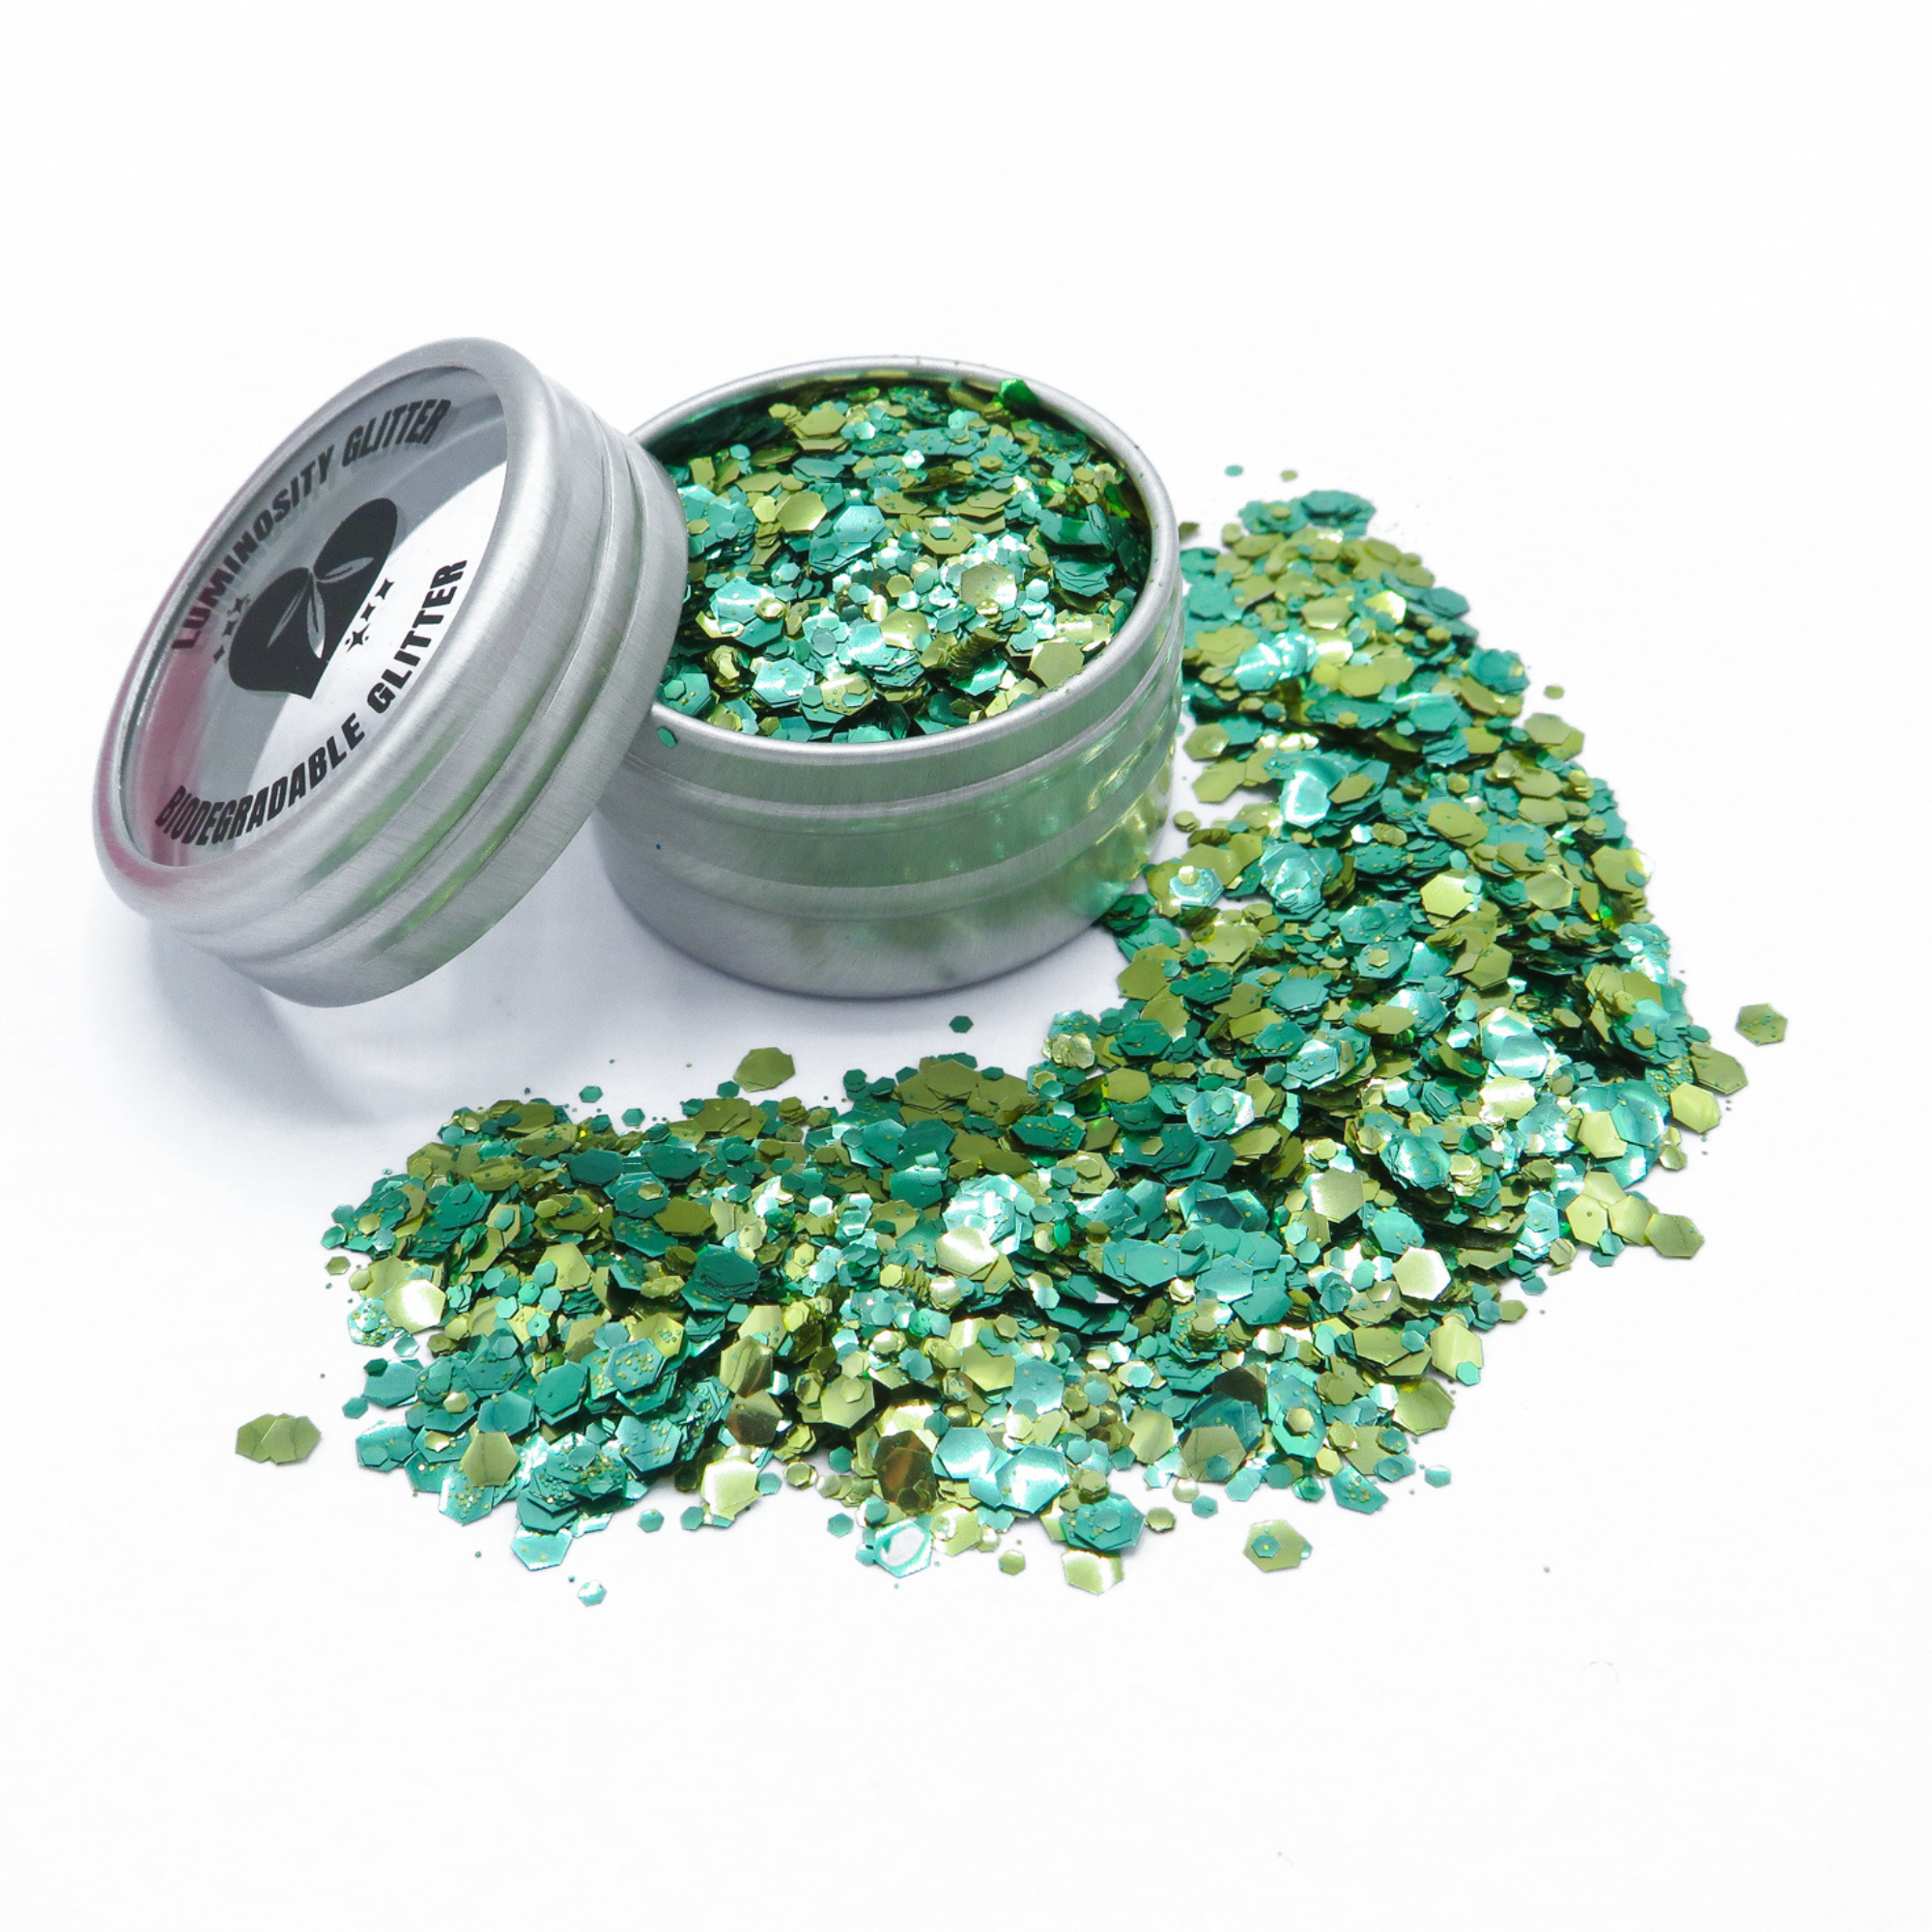 Pina Bioglitter mix is proven to biodegrade in a natural freshwater environment in around four weeks